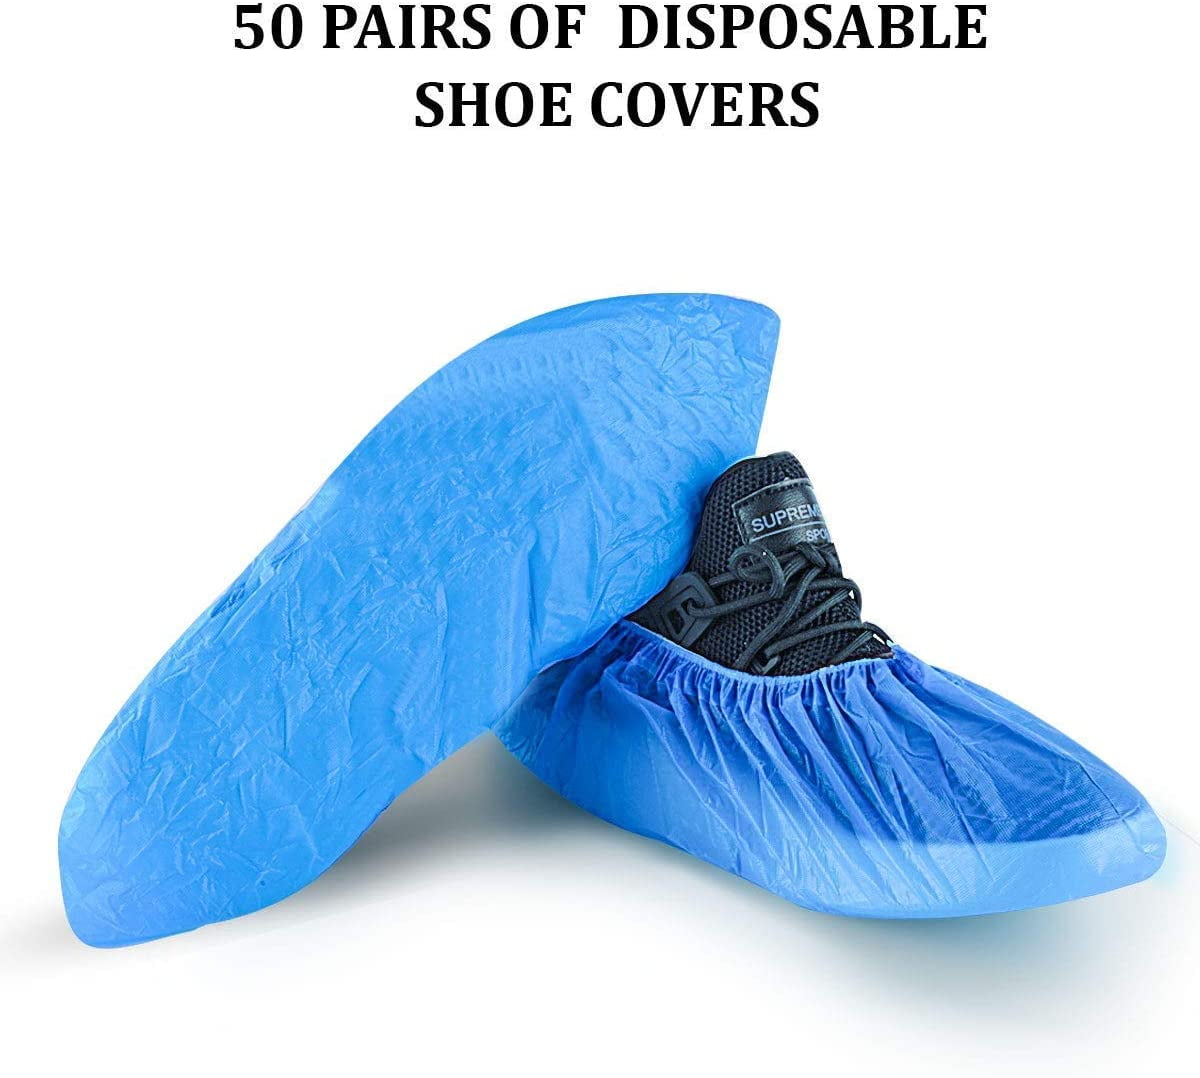 100 PCS Waterproof Boot Covers Disposable Shoe Cover Elastic Protect Overshoes 